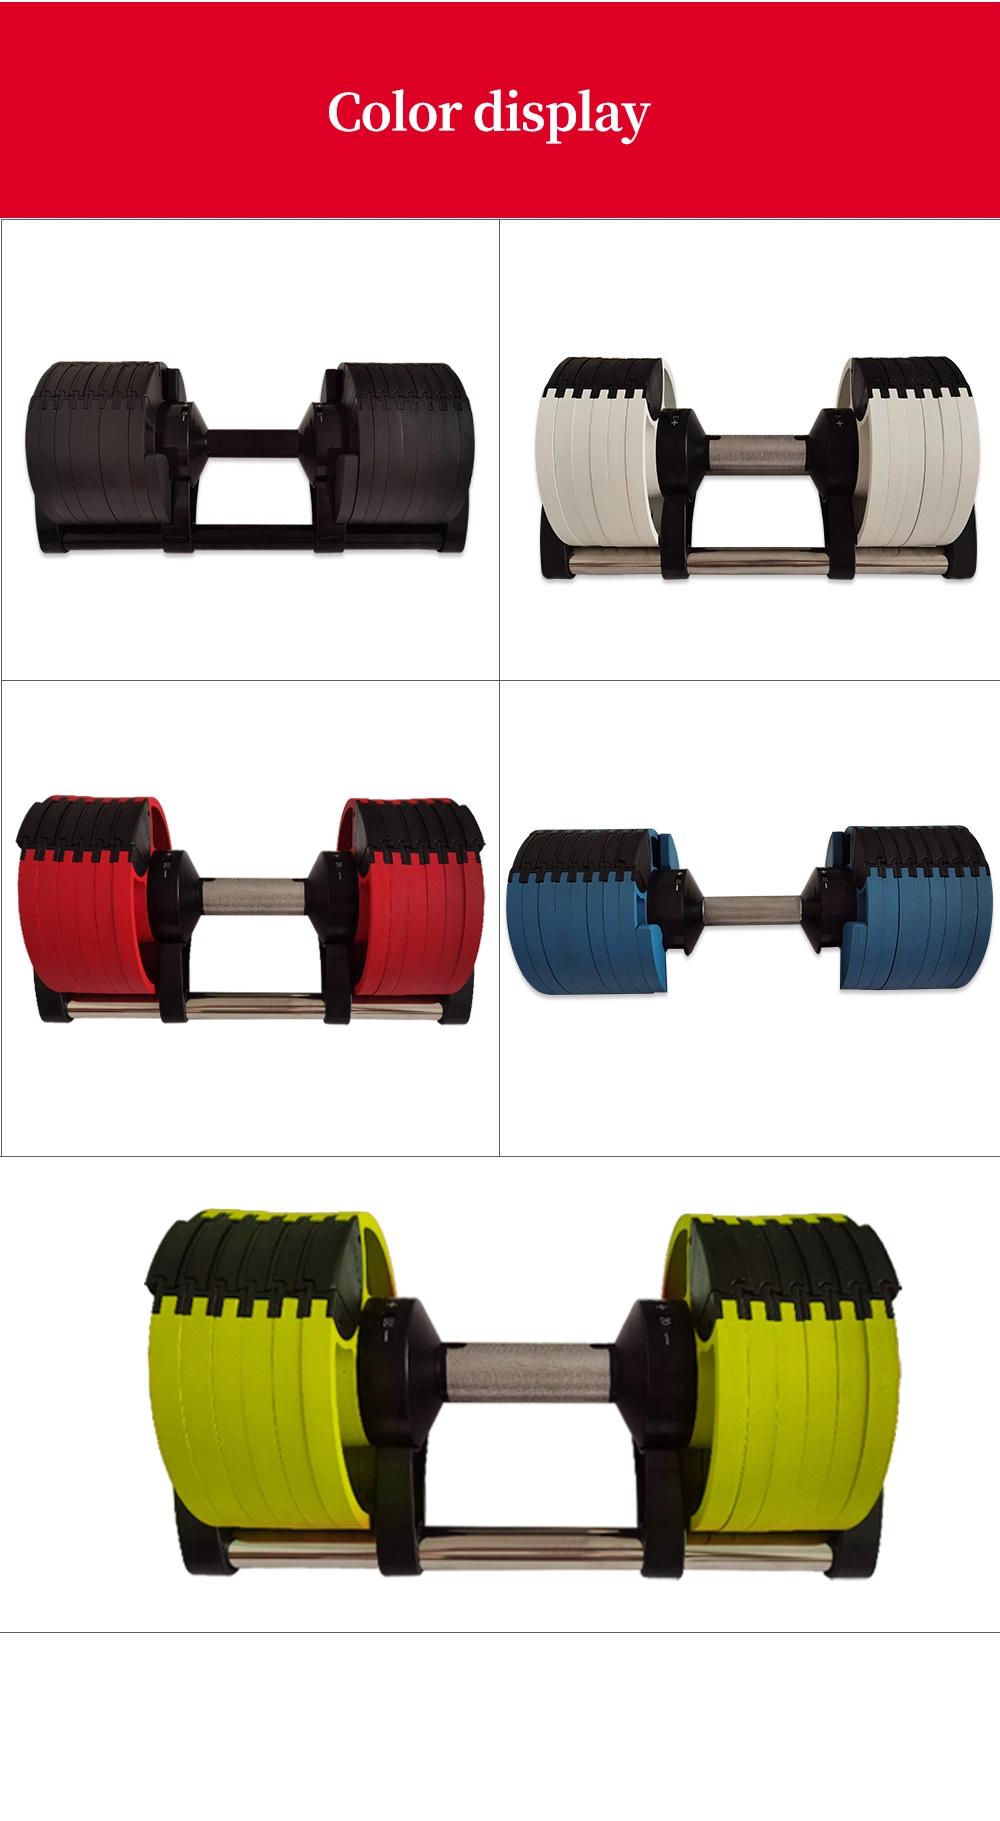 New Type of Weight Adjustable Dumbbells for Use in Gyms